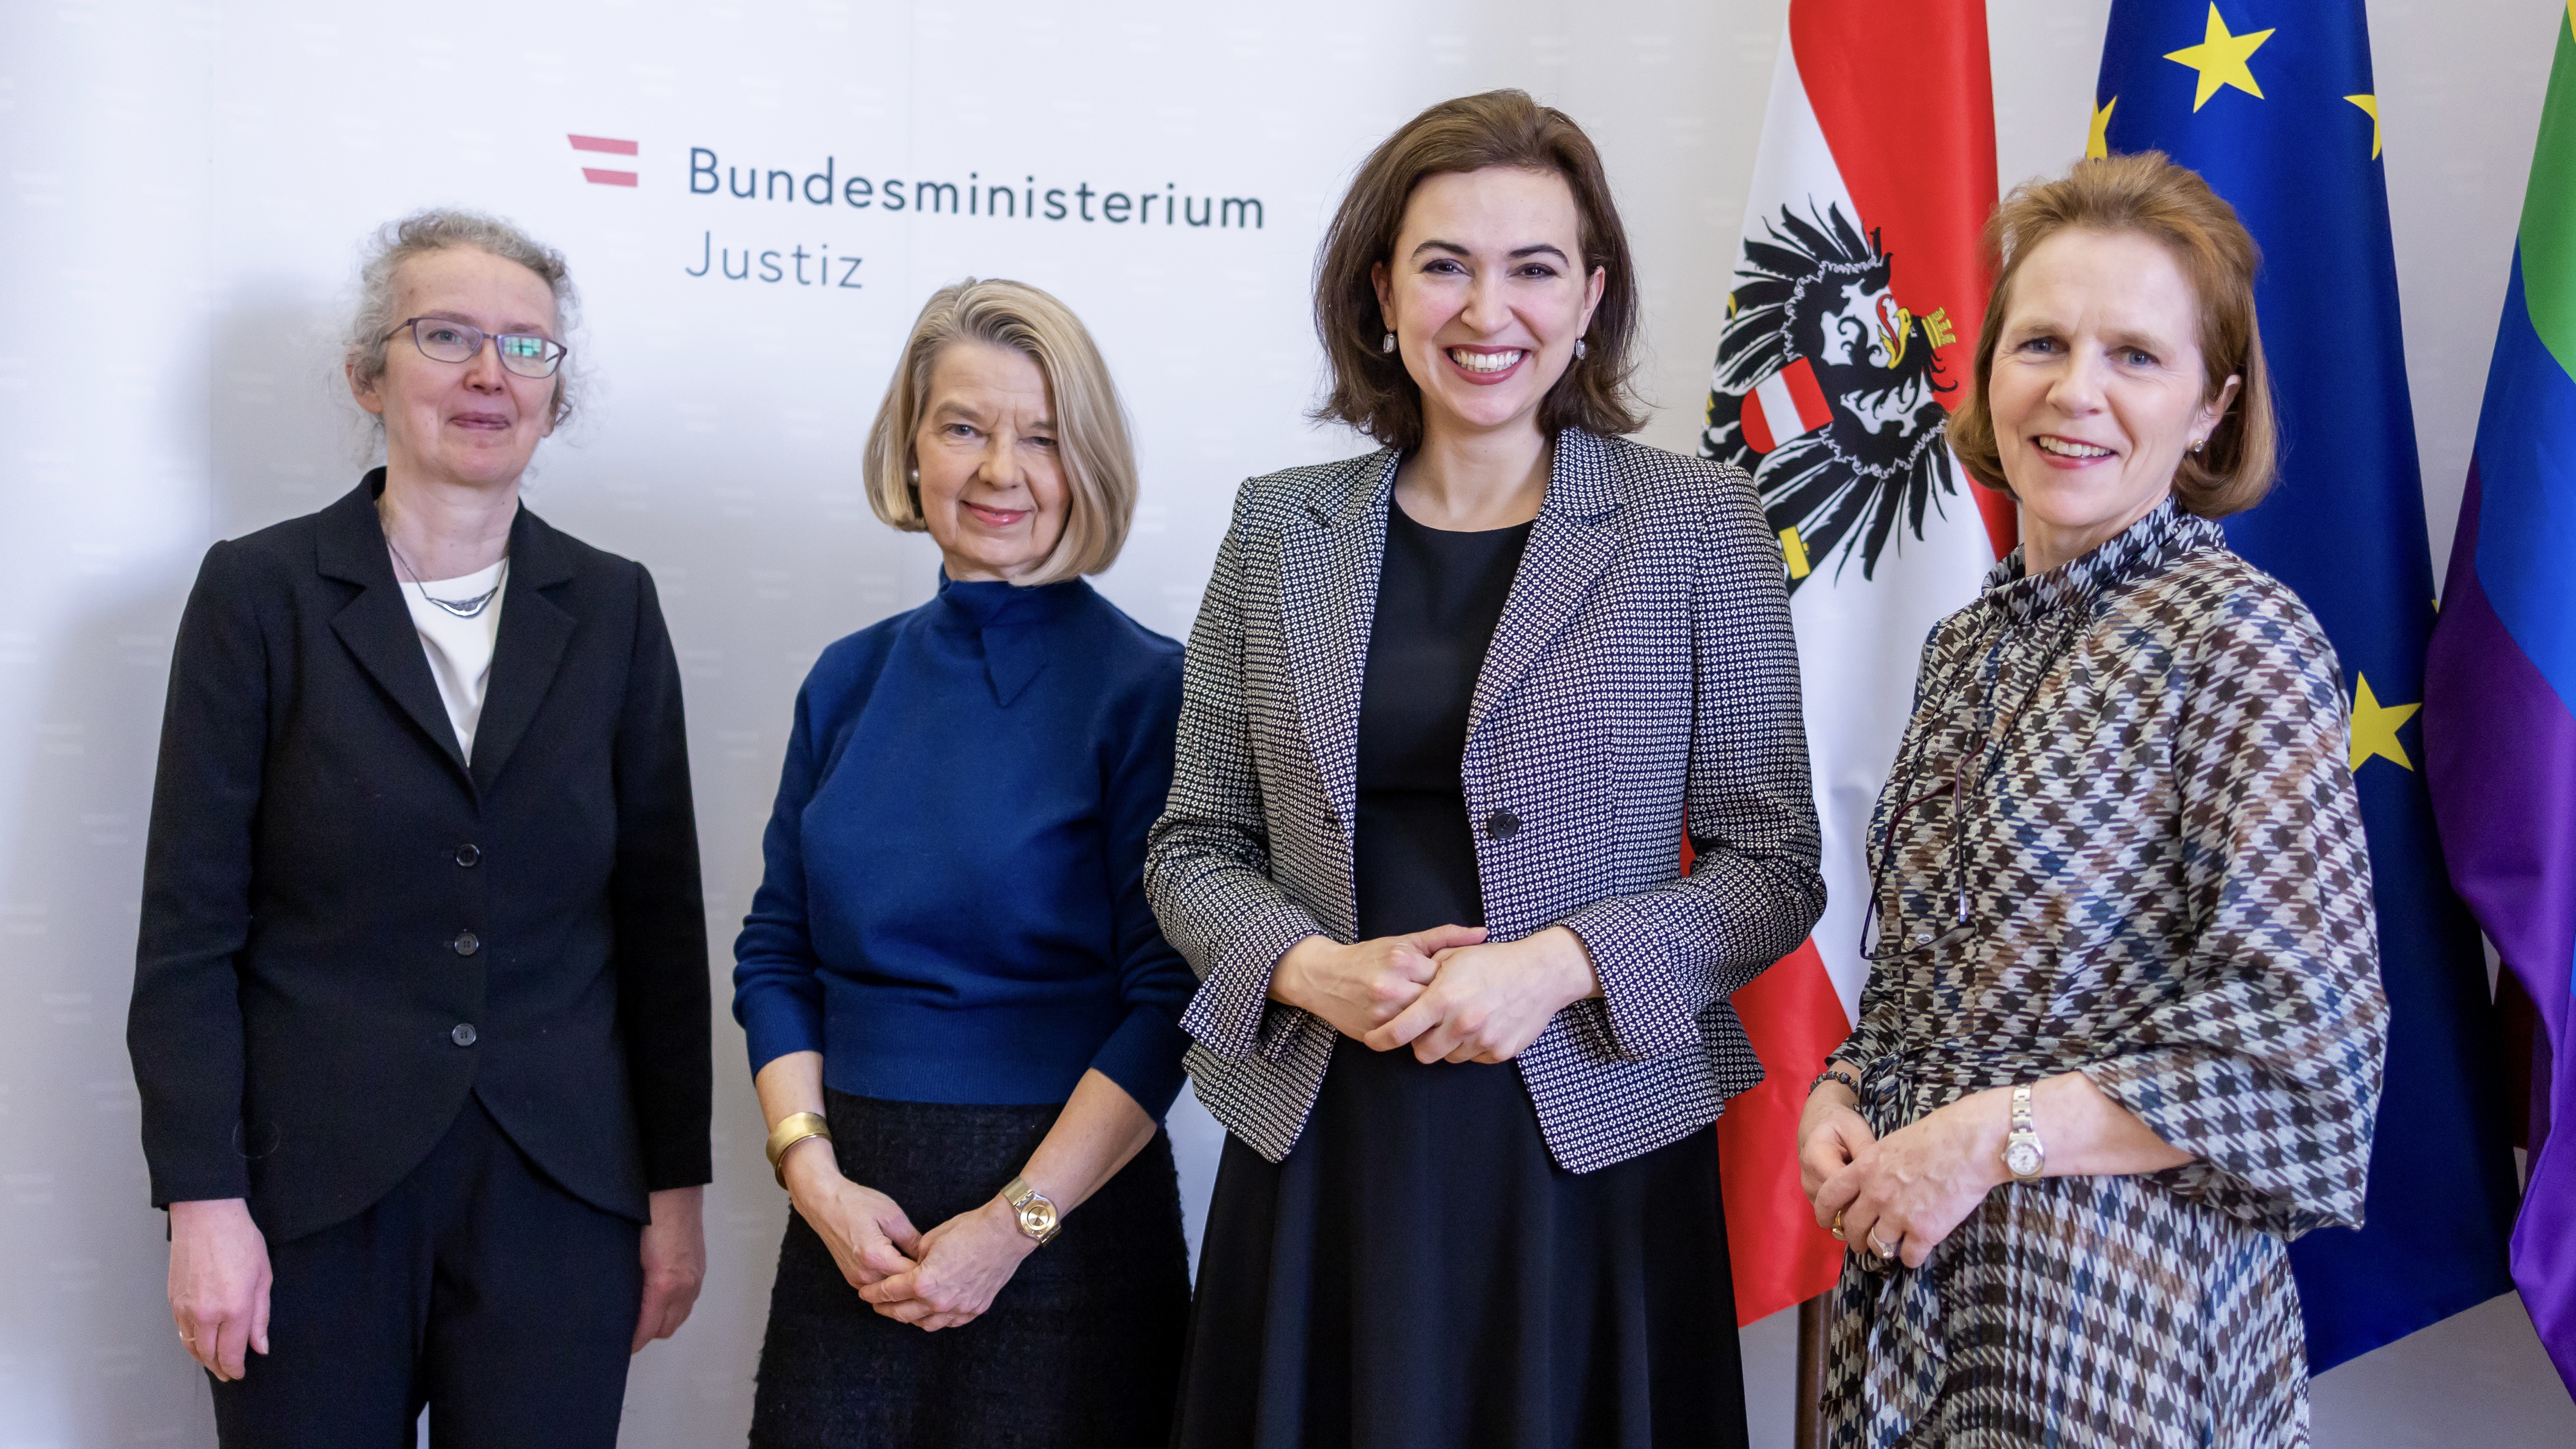 Meeting with the Minister of Justice of Austria